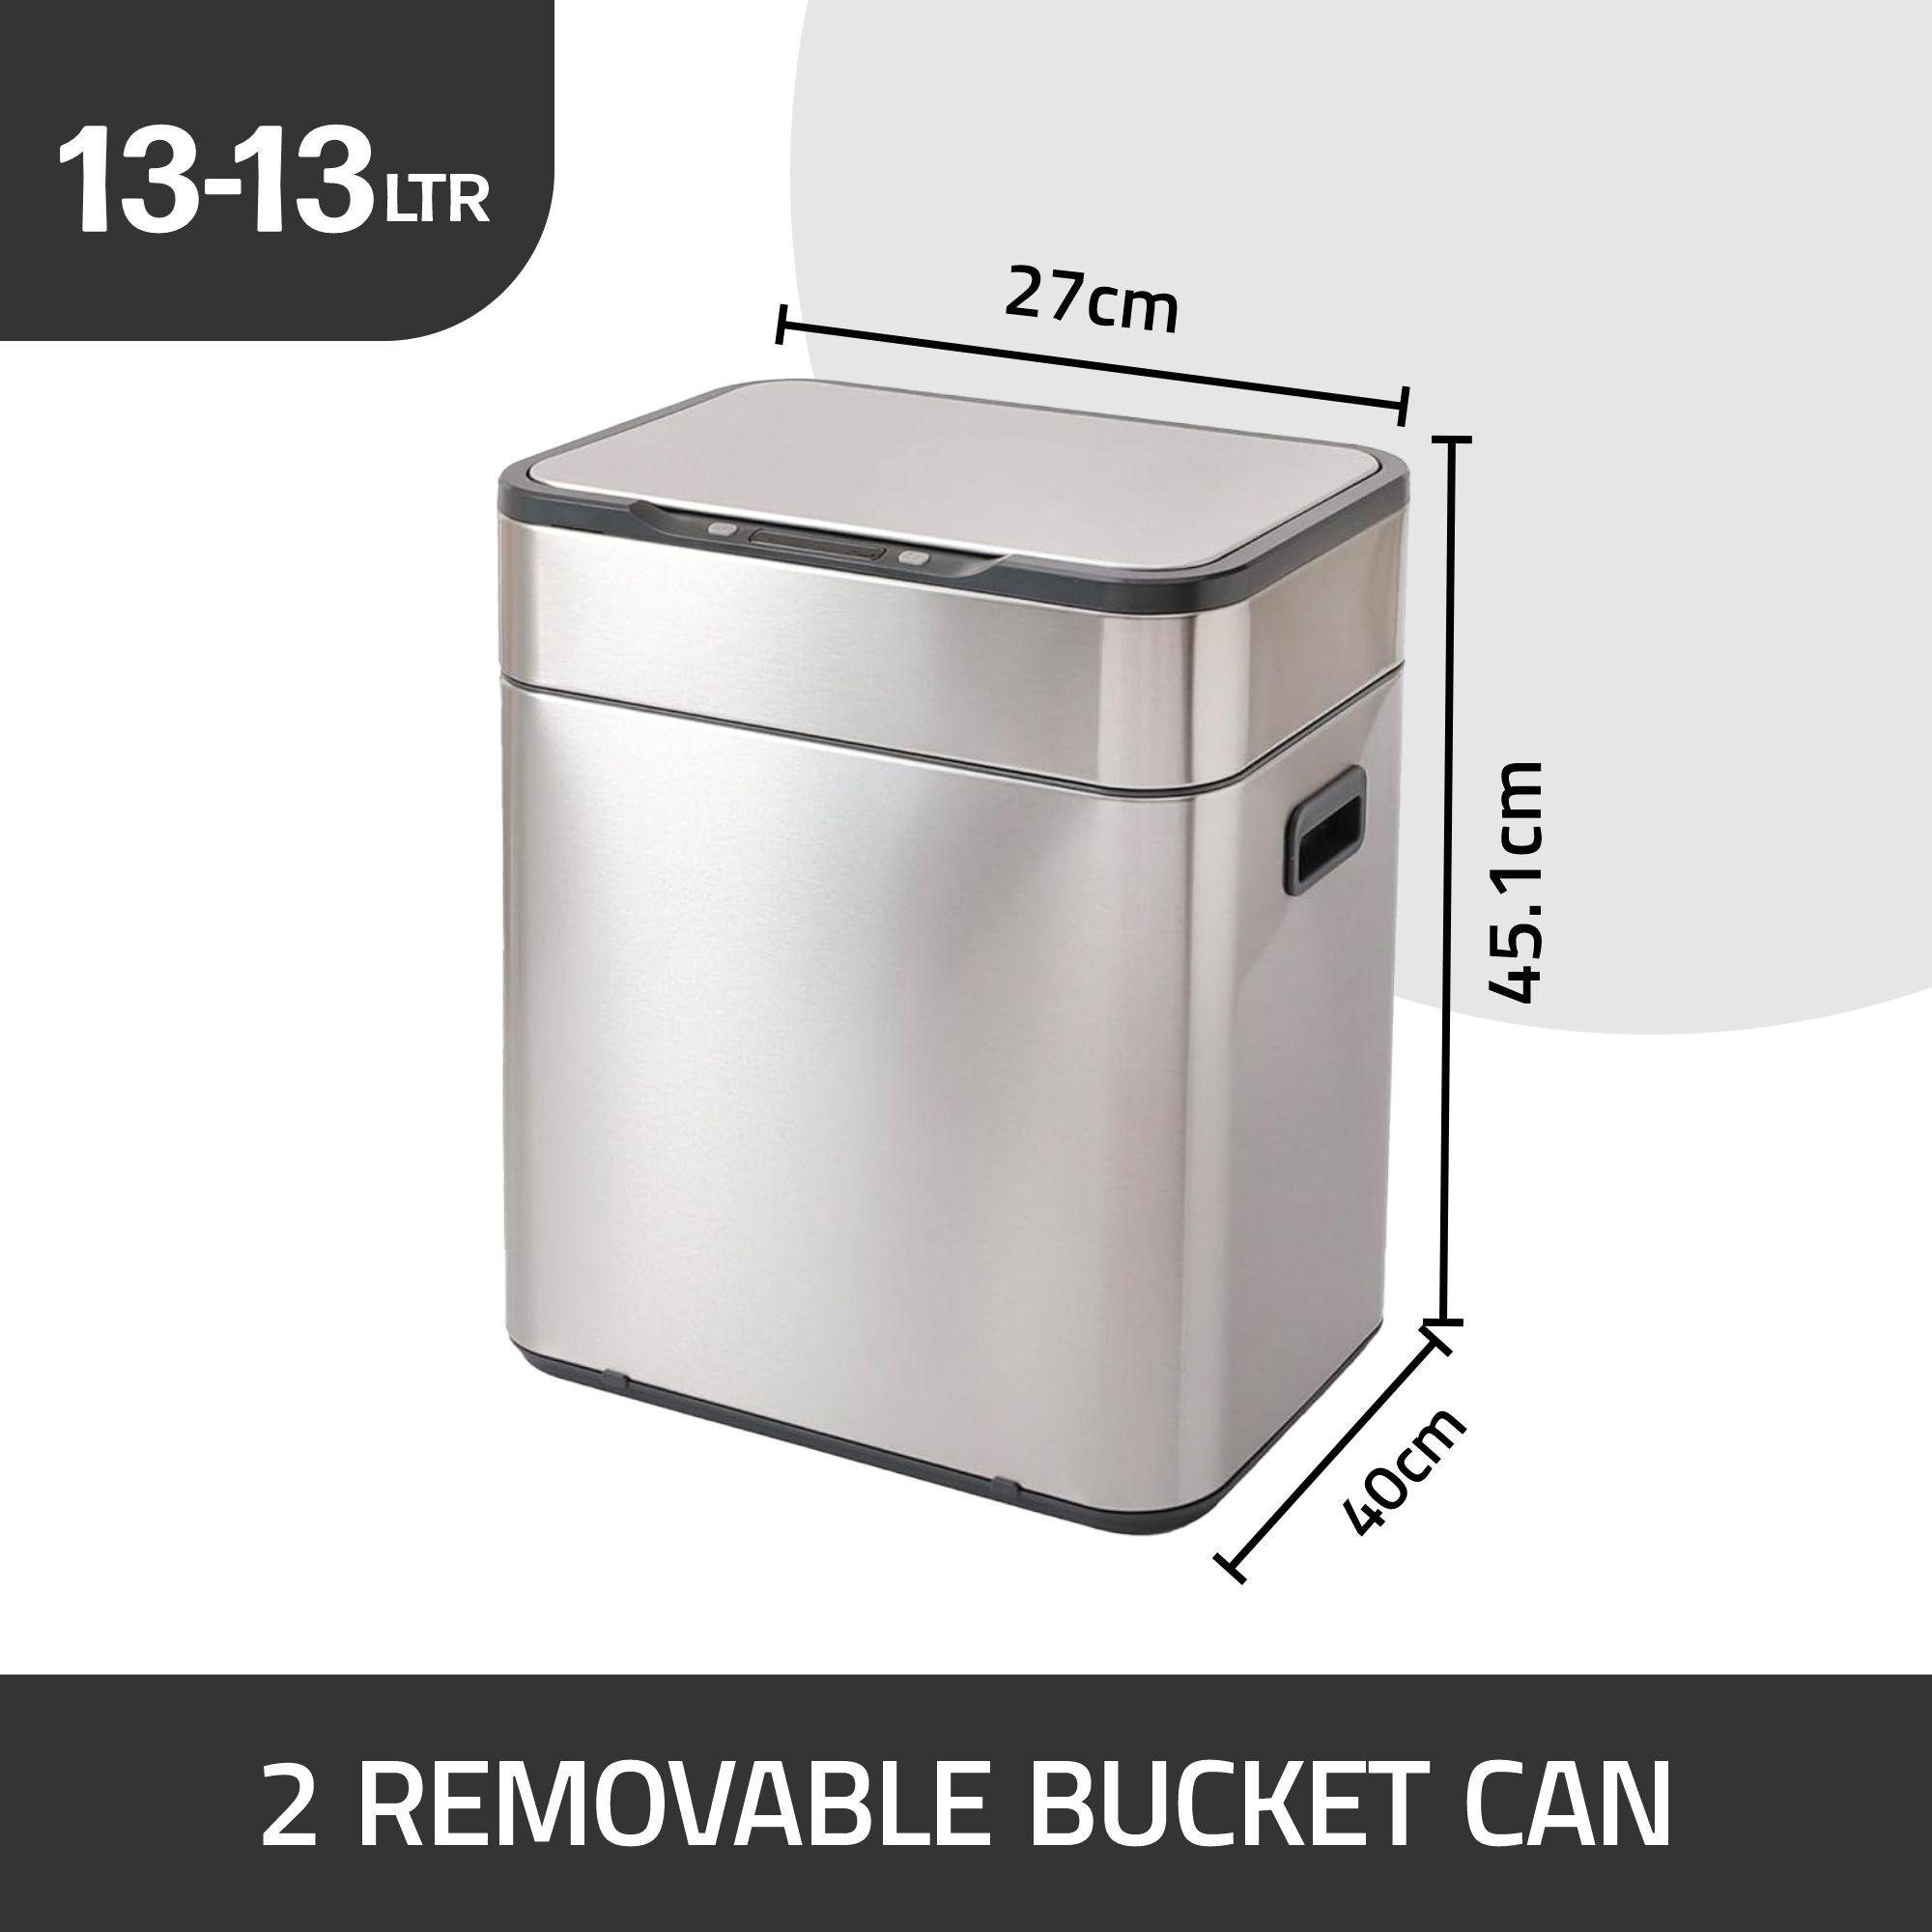 Kuber Industries Sensor Dustbin | Dual Compartment Sensor Dustbin | Touchless Trash Can | Smart Dustbin for Bedroom-Office-Living Room | 2 Removable Bucket Can | YW-5513 | 13 LTR | Silver